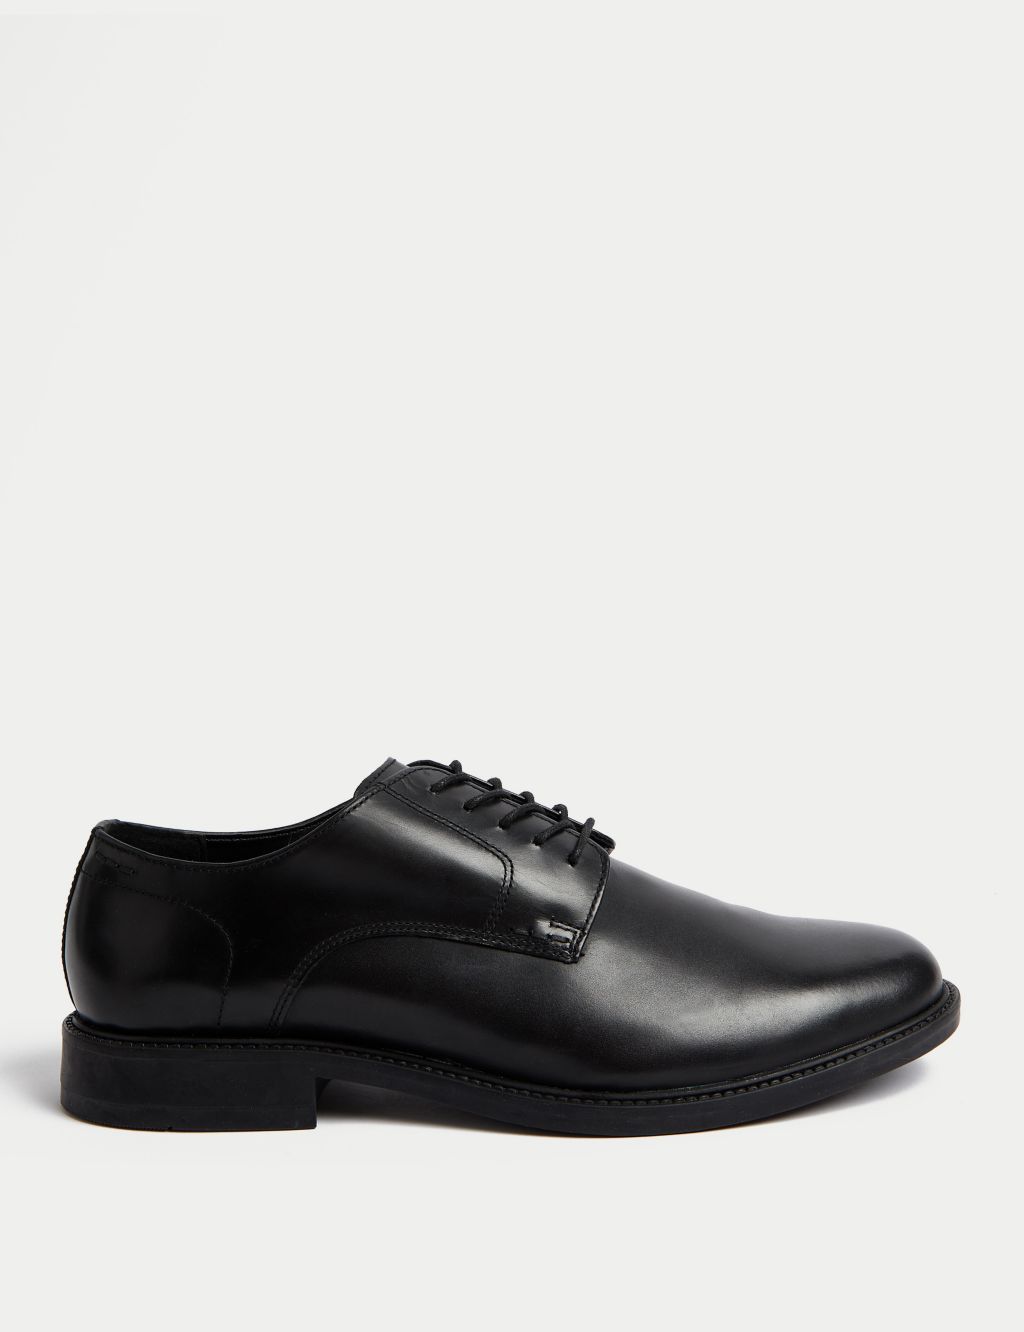 Leather Derby Shoes image 1